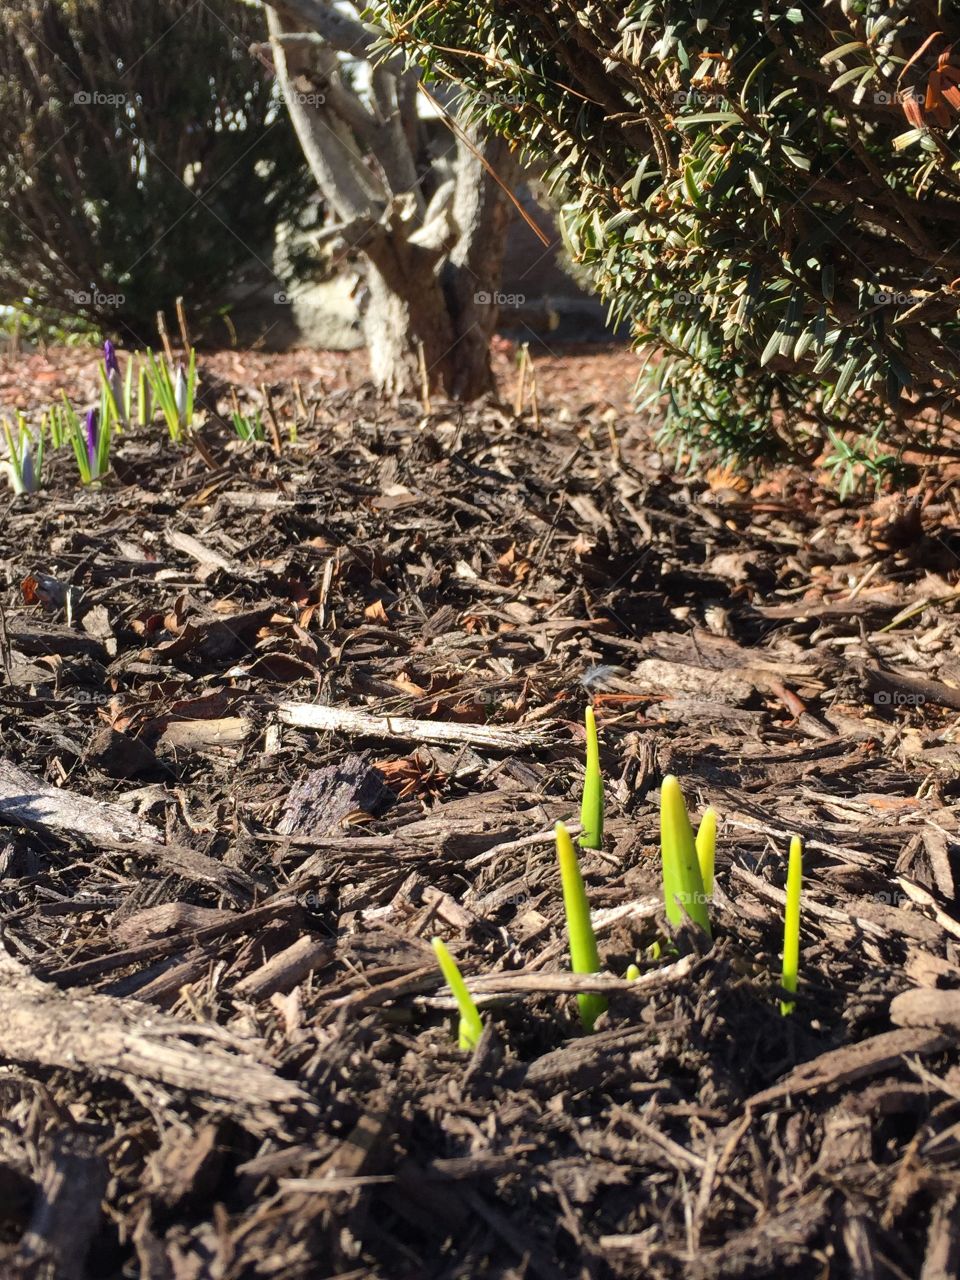 Crocus shoots! These bulbs are always the first sign of spring. 🌱